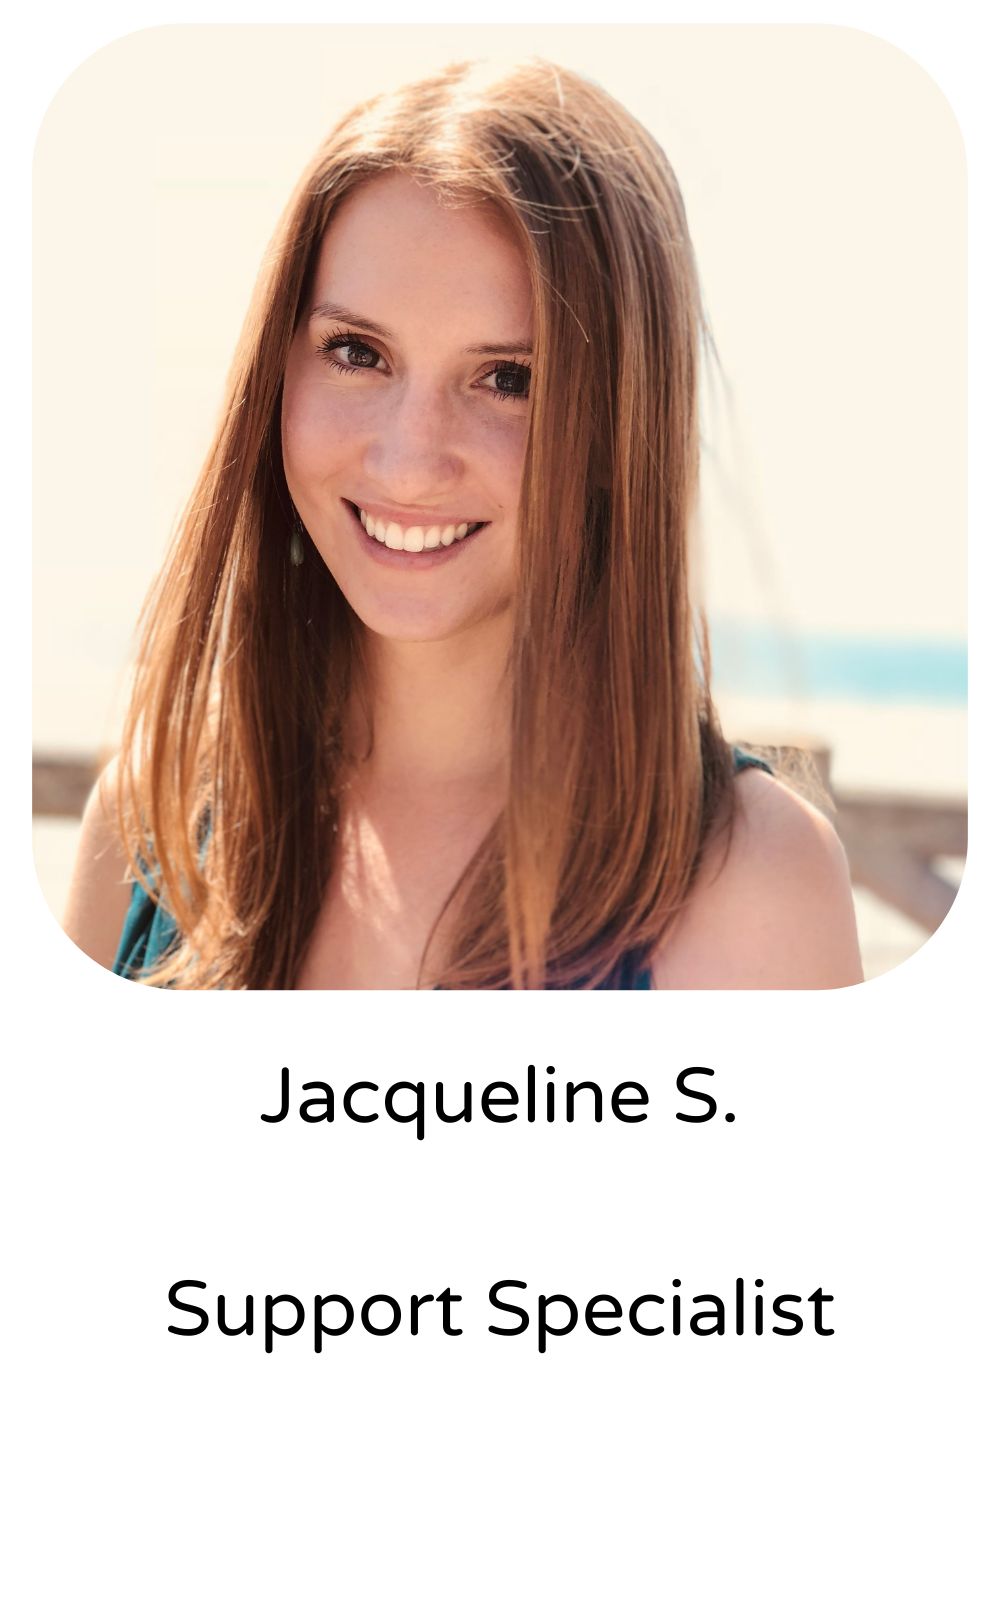 Jacqueline S, Support Specialist